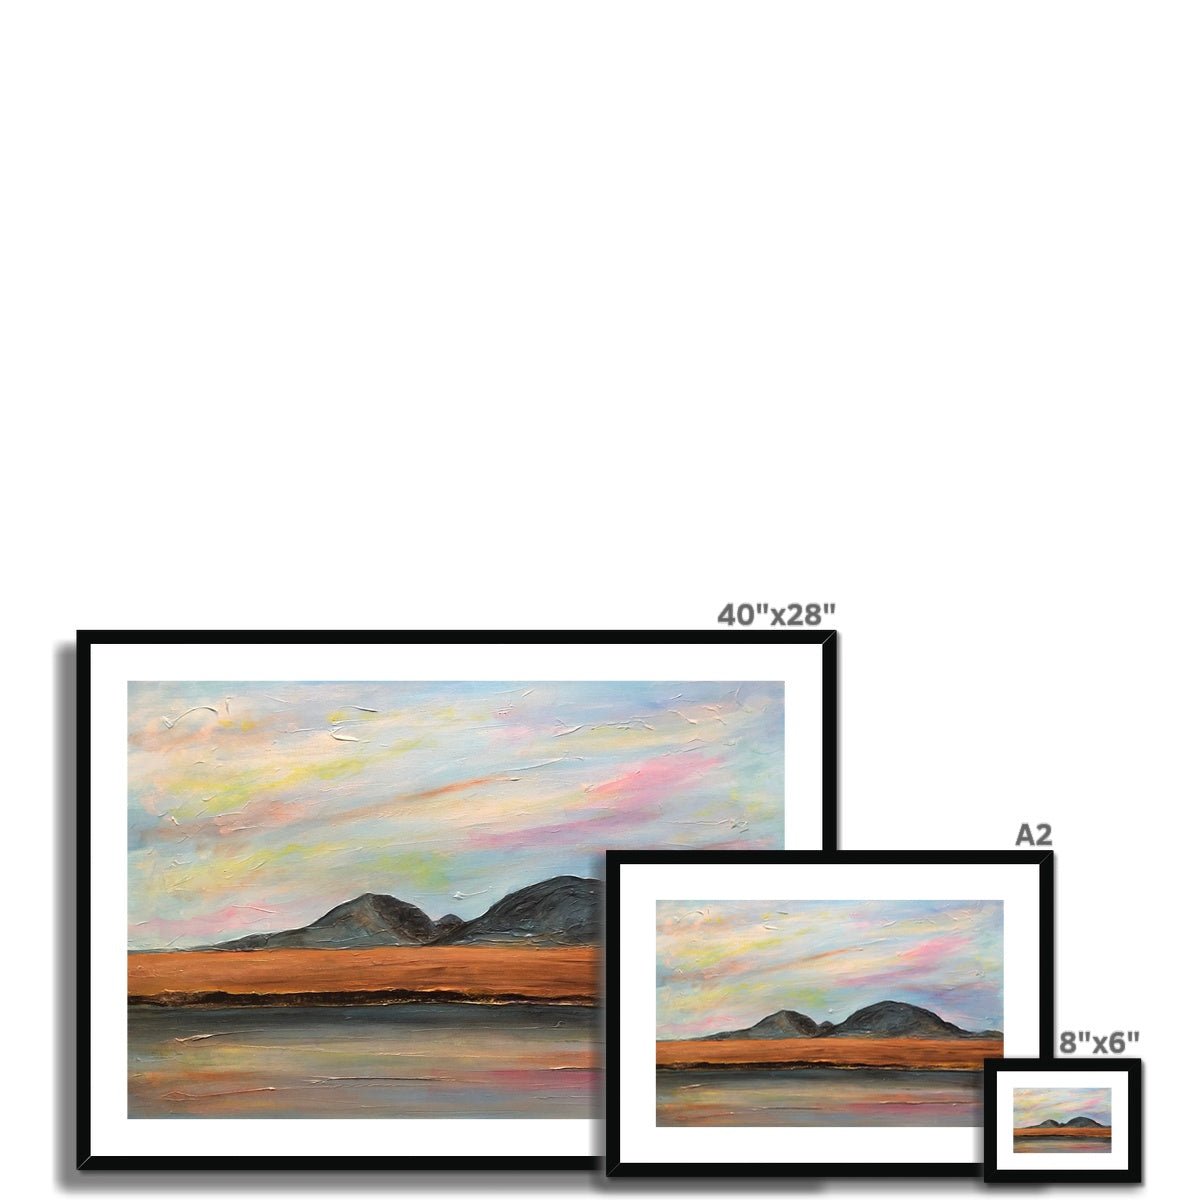 Jura Dawn Painting | Framed & Mounted Prints From Scotland-Framed & Mounted Prints-Hebridean Islands Art Gallery-Paintings, Prints, Homeware, Art Gifts From Scotland By Scottish Artist Kevin Hunter